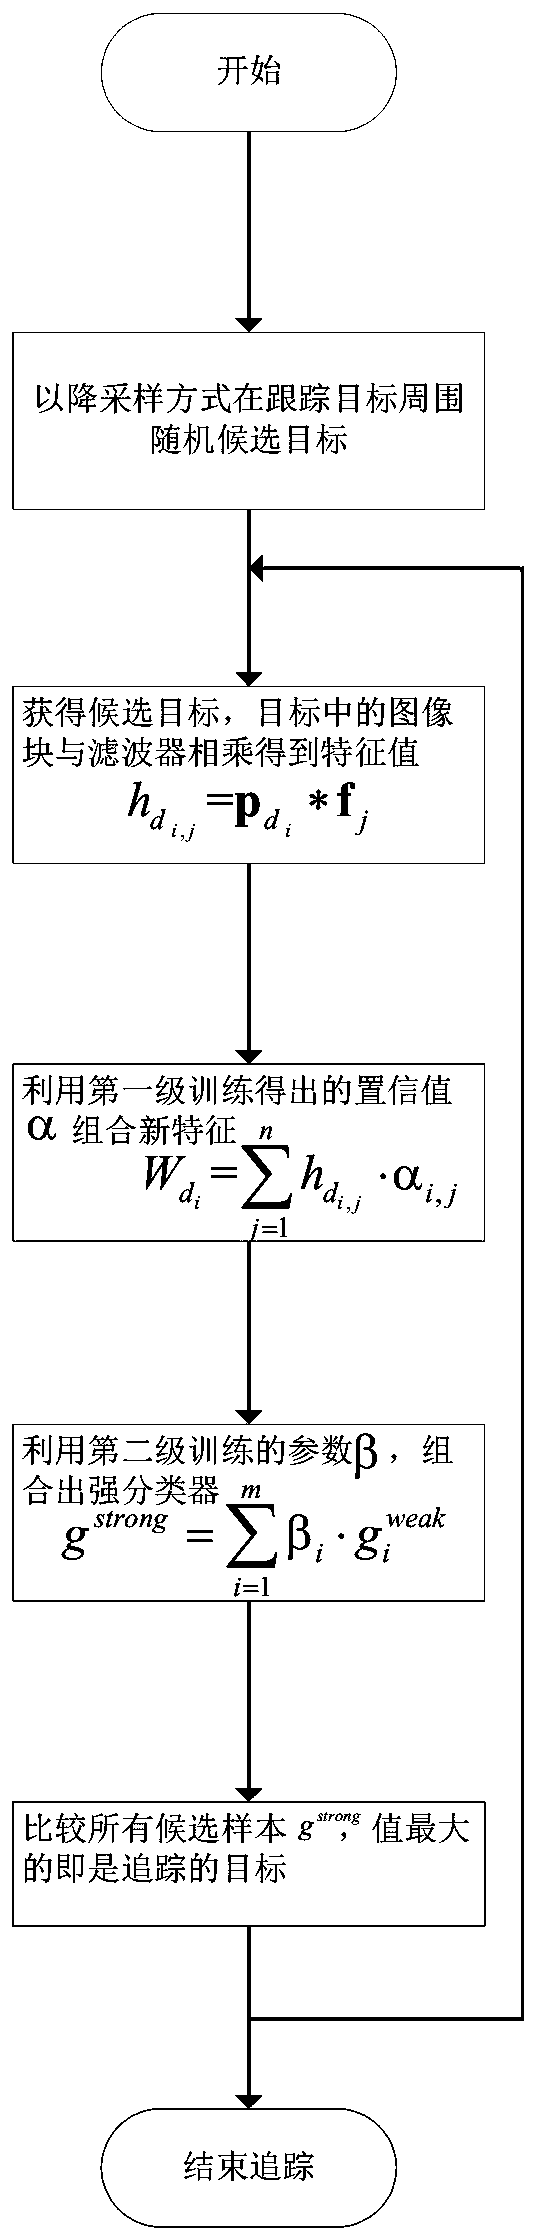 A method of video target tracking using two-layer cascaded boosting classification algorithm